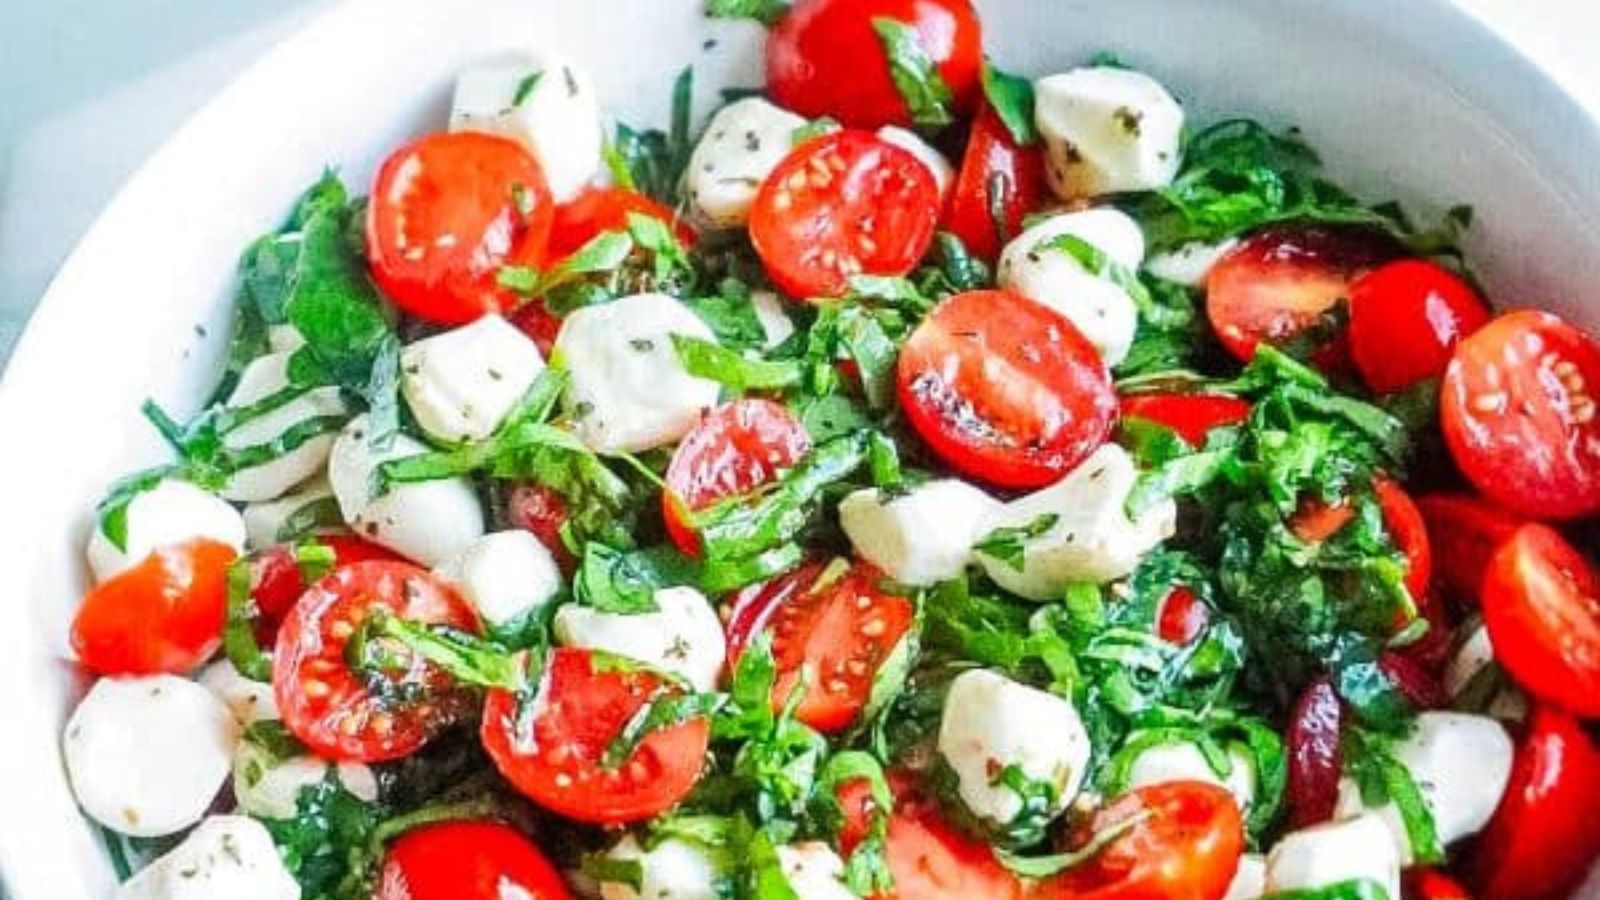 20 Spinach Recipes That Are Too Good to Overlook